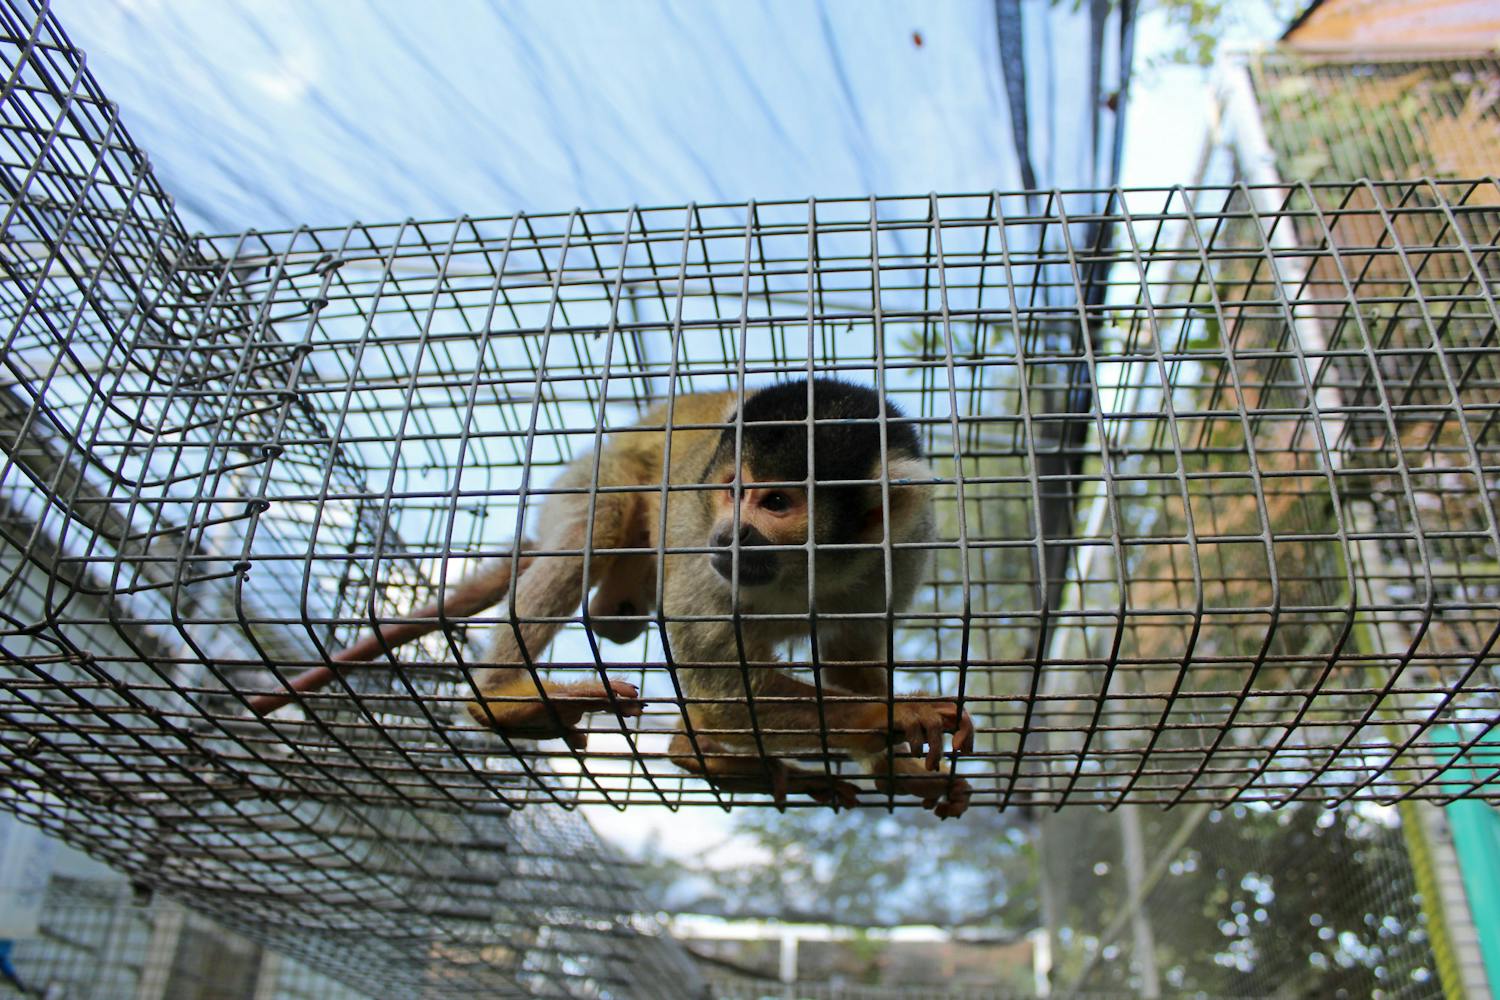 A squirrel monkey walks around its enclosure at the Jungle Friends Primate Sanctuary on Tuesday, Oct. 12, 2021.